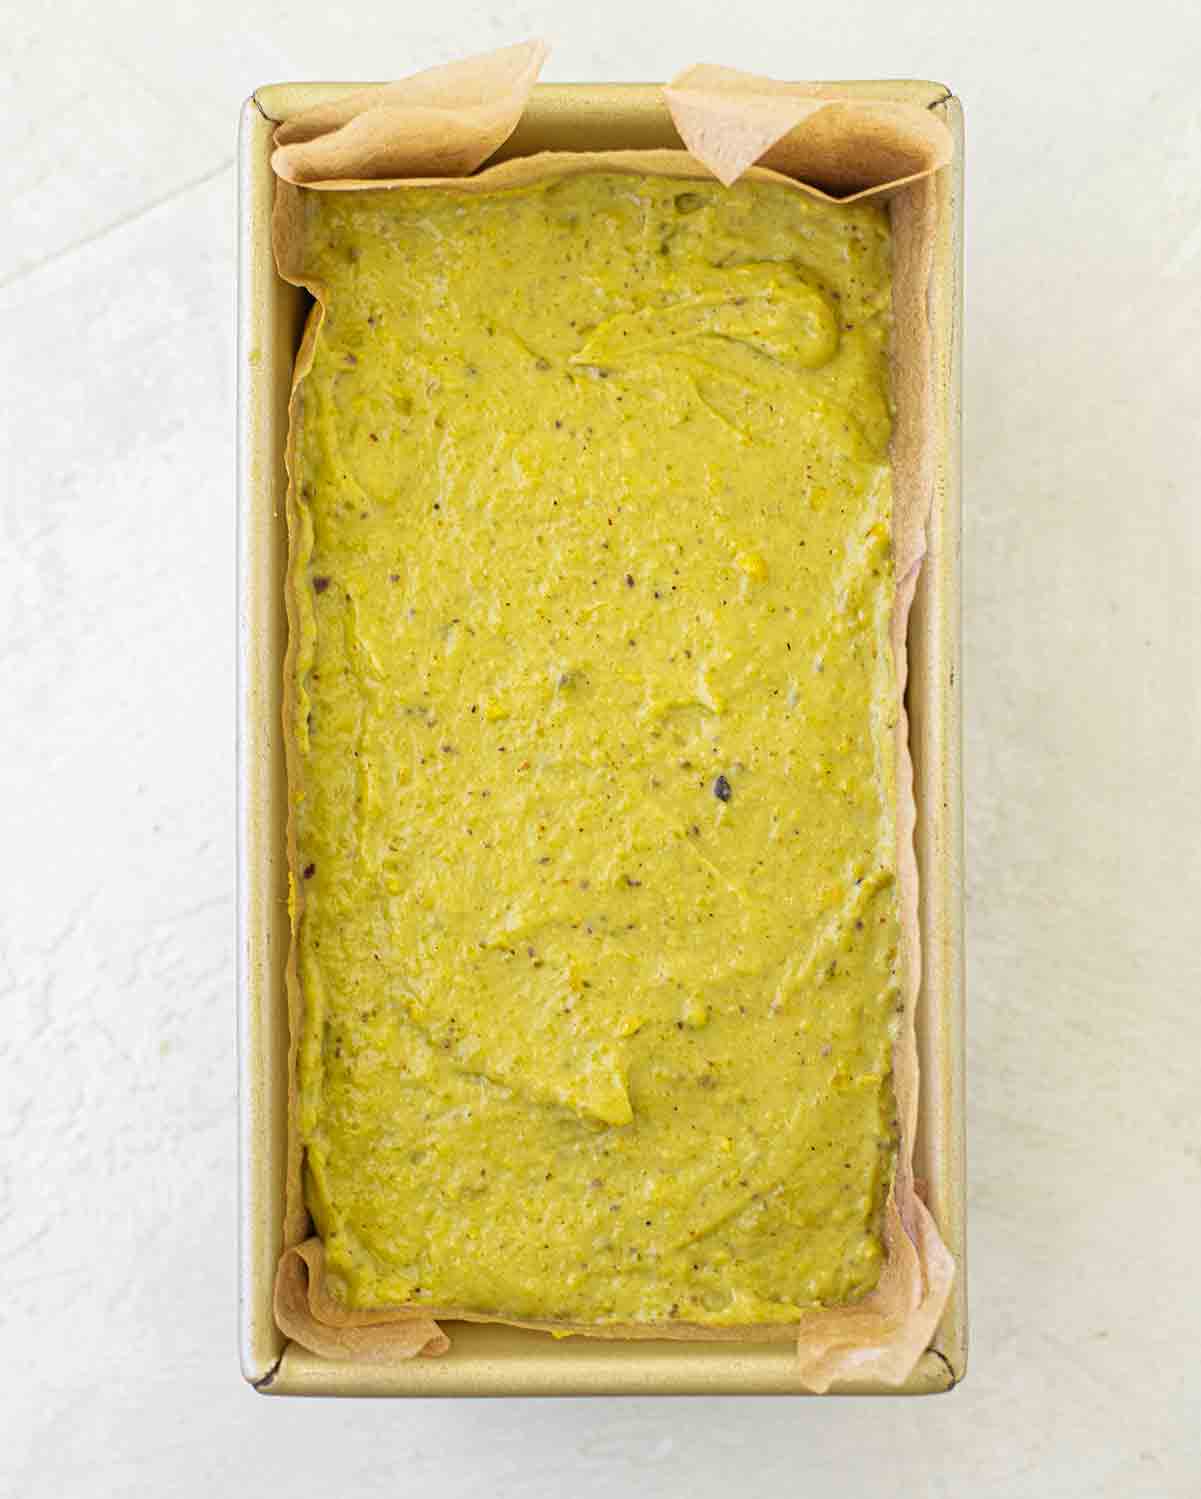 Unbaked pistachio cake in lined baking tin.